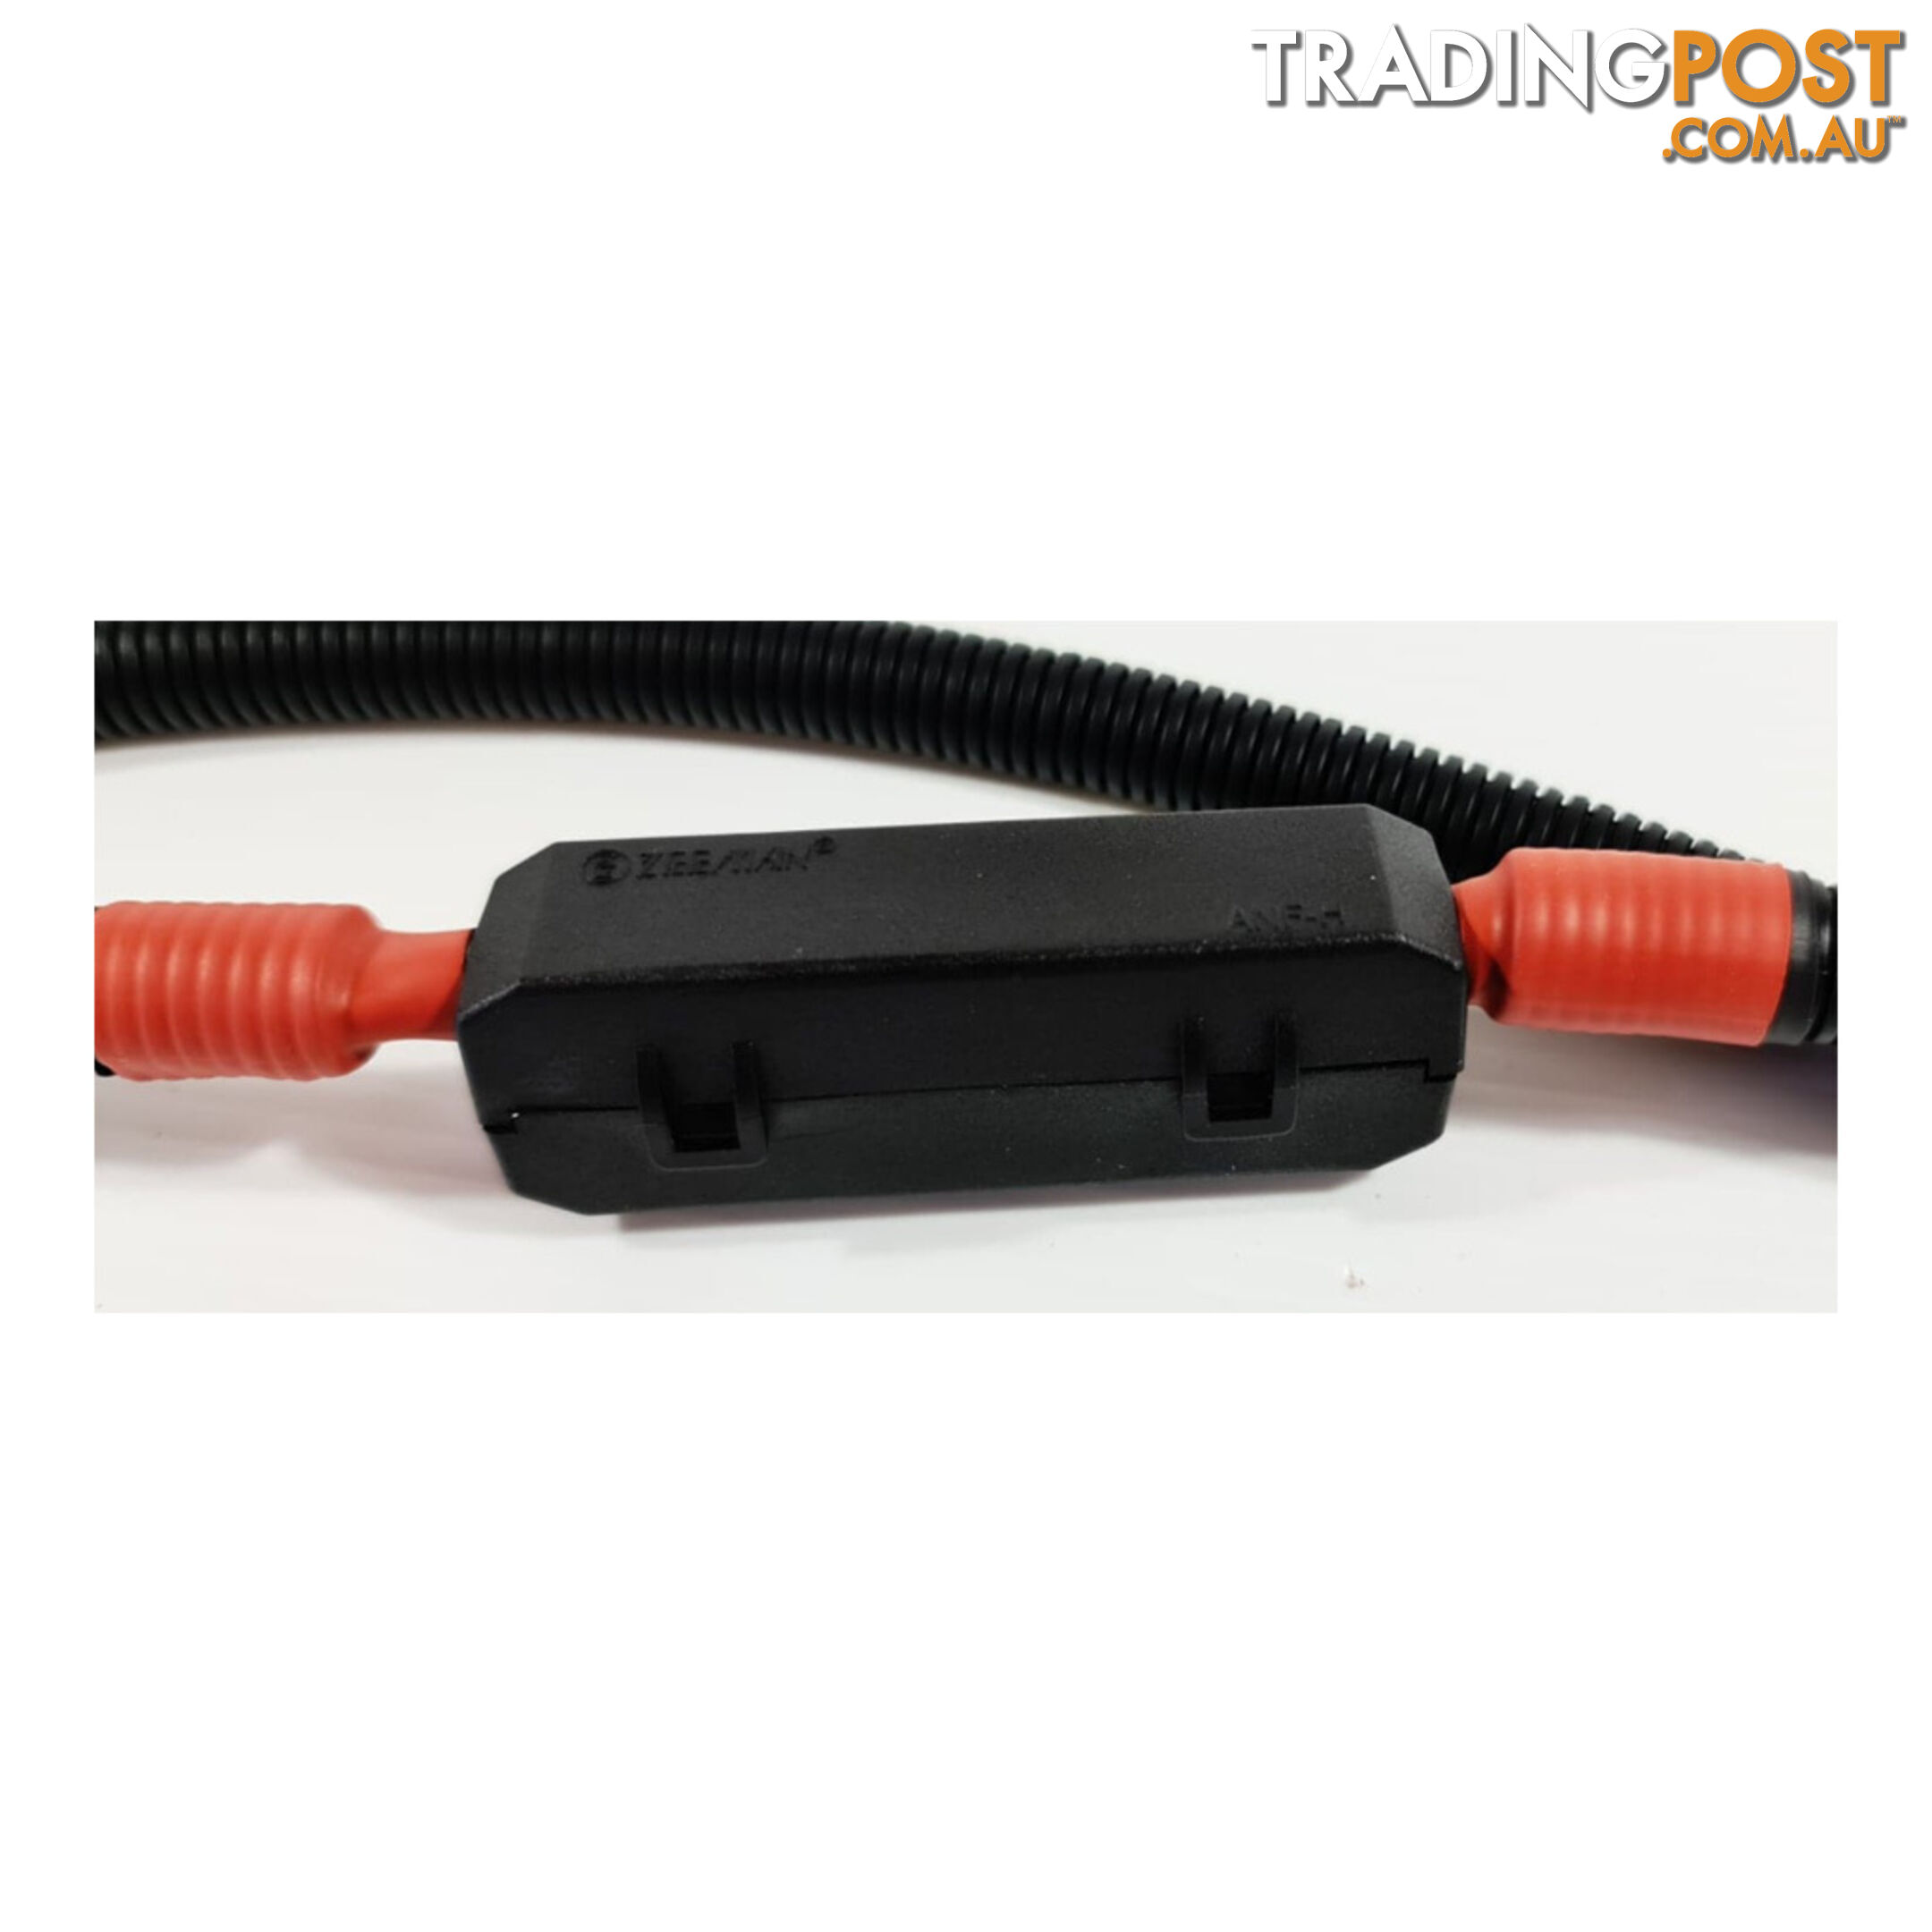 Midi Fuse Holder In Line Rated 30  - 150 amps Inc Links Up, to 6 B S Cable SKU - LV5383